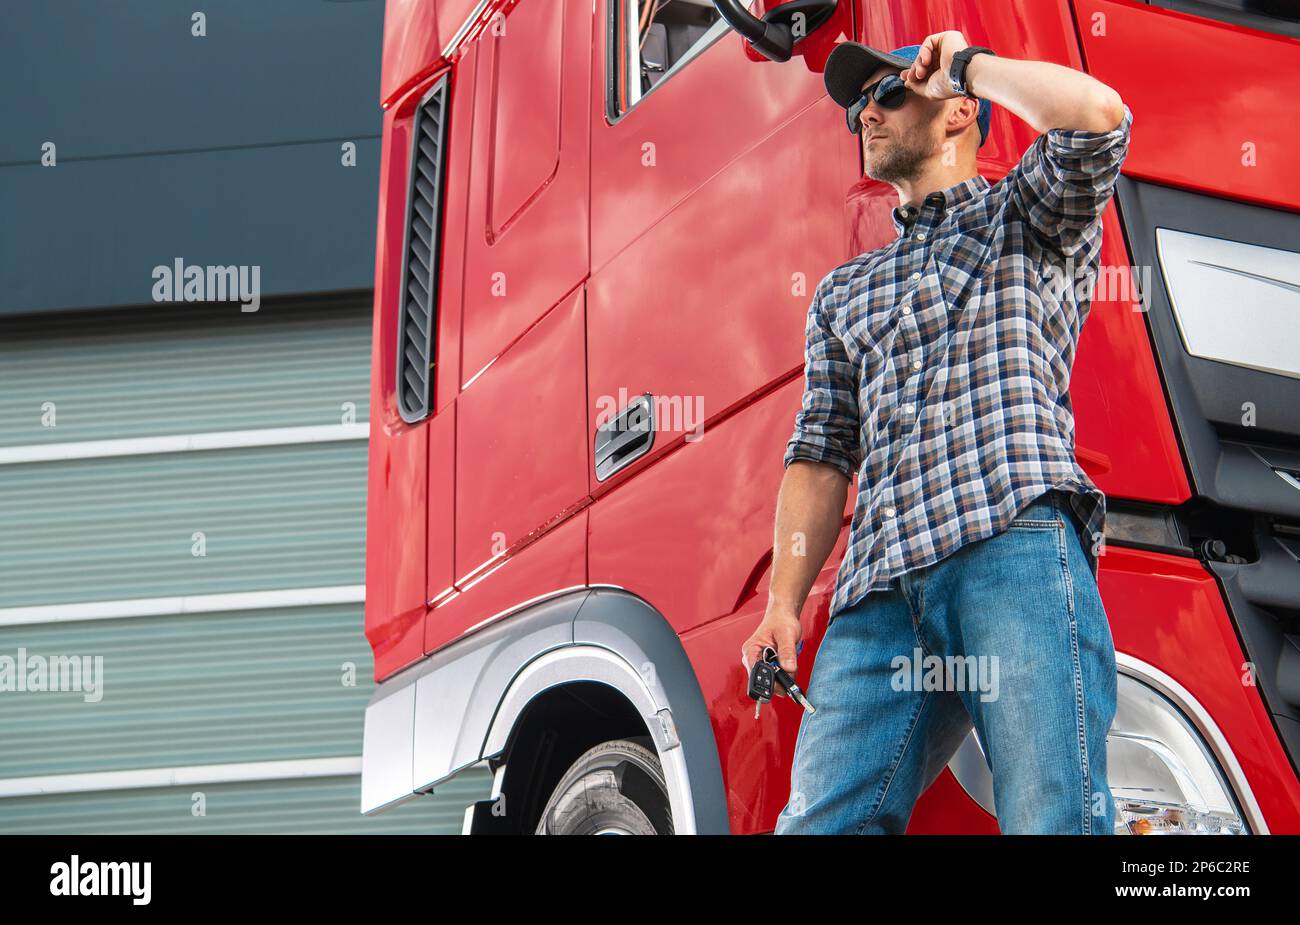 https://c8.alamy.com/comp/2P6C2RE/middle-age-caucasian-trucker-wearing-sunglasses-and-a-hat-in-front-of-his-brand-new-semi-truck-tractor-transportation-industry-theme-2P6C2RE.jpg